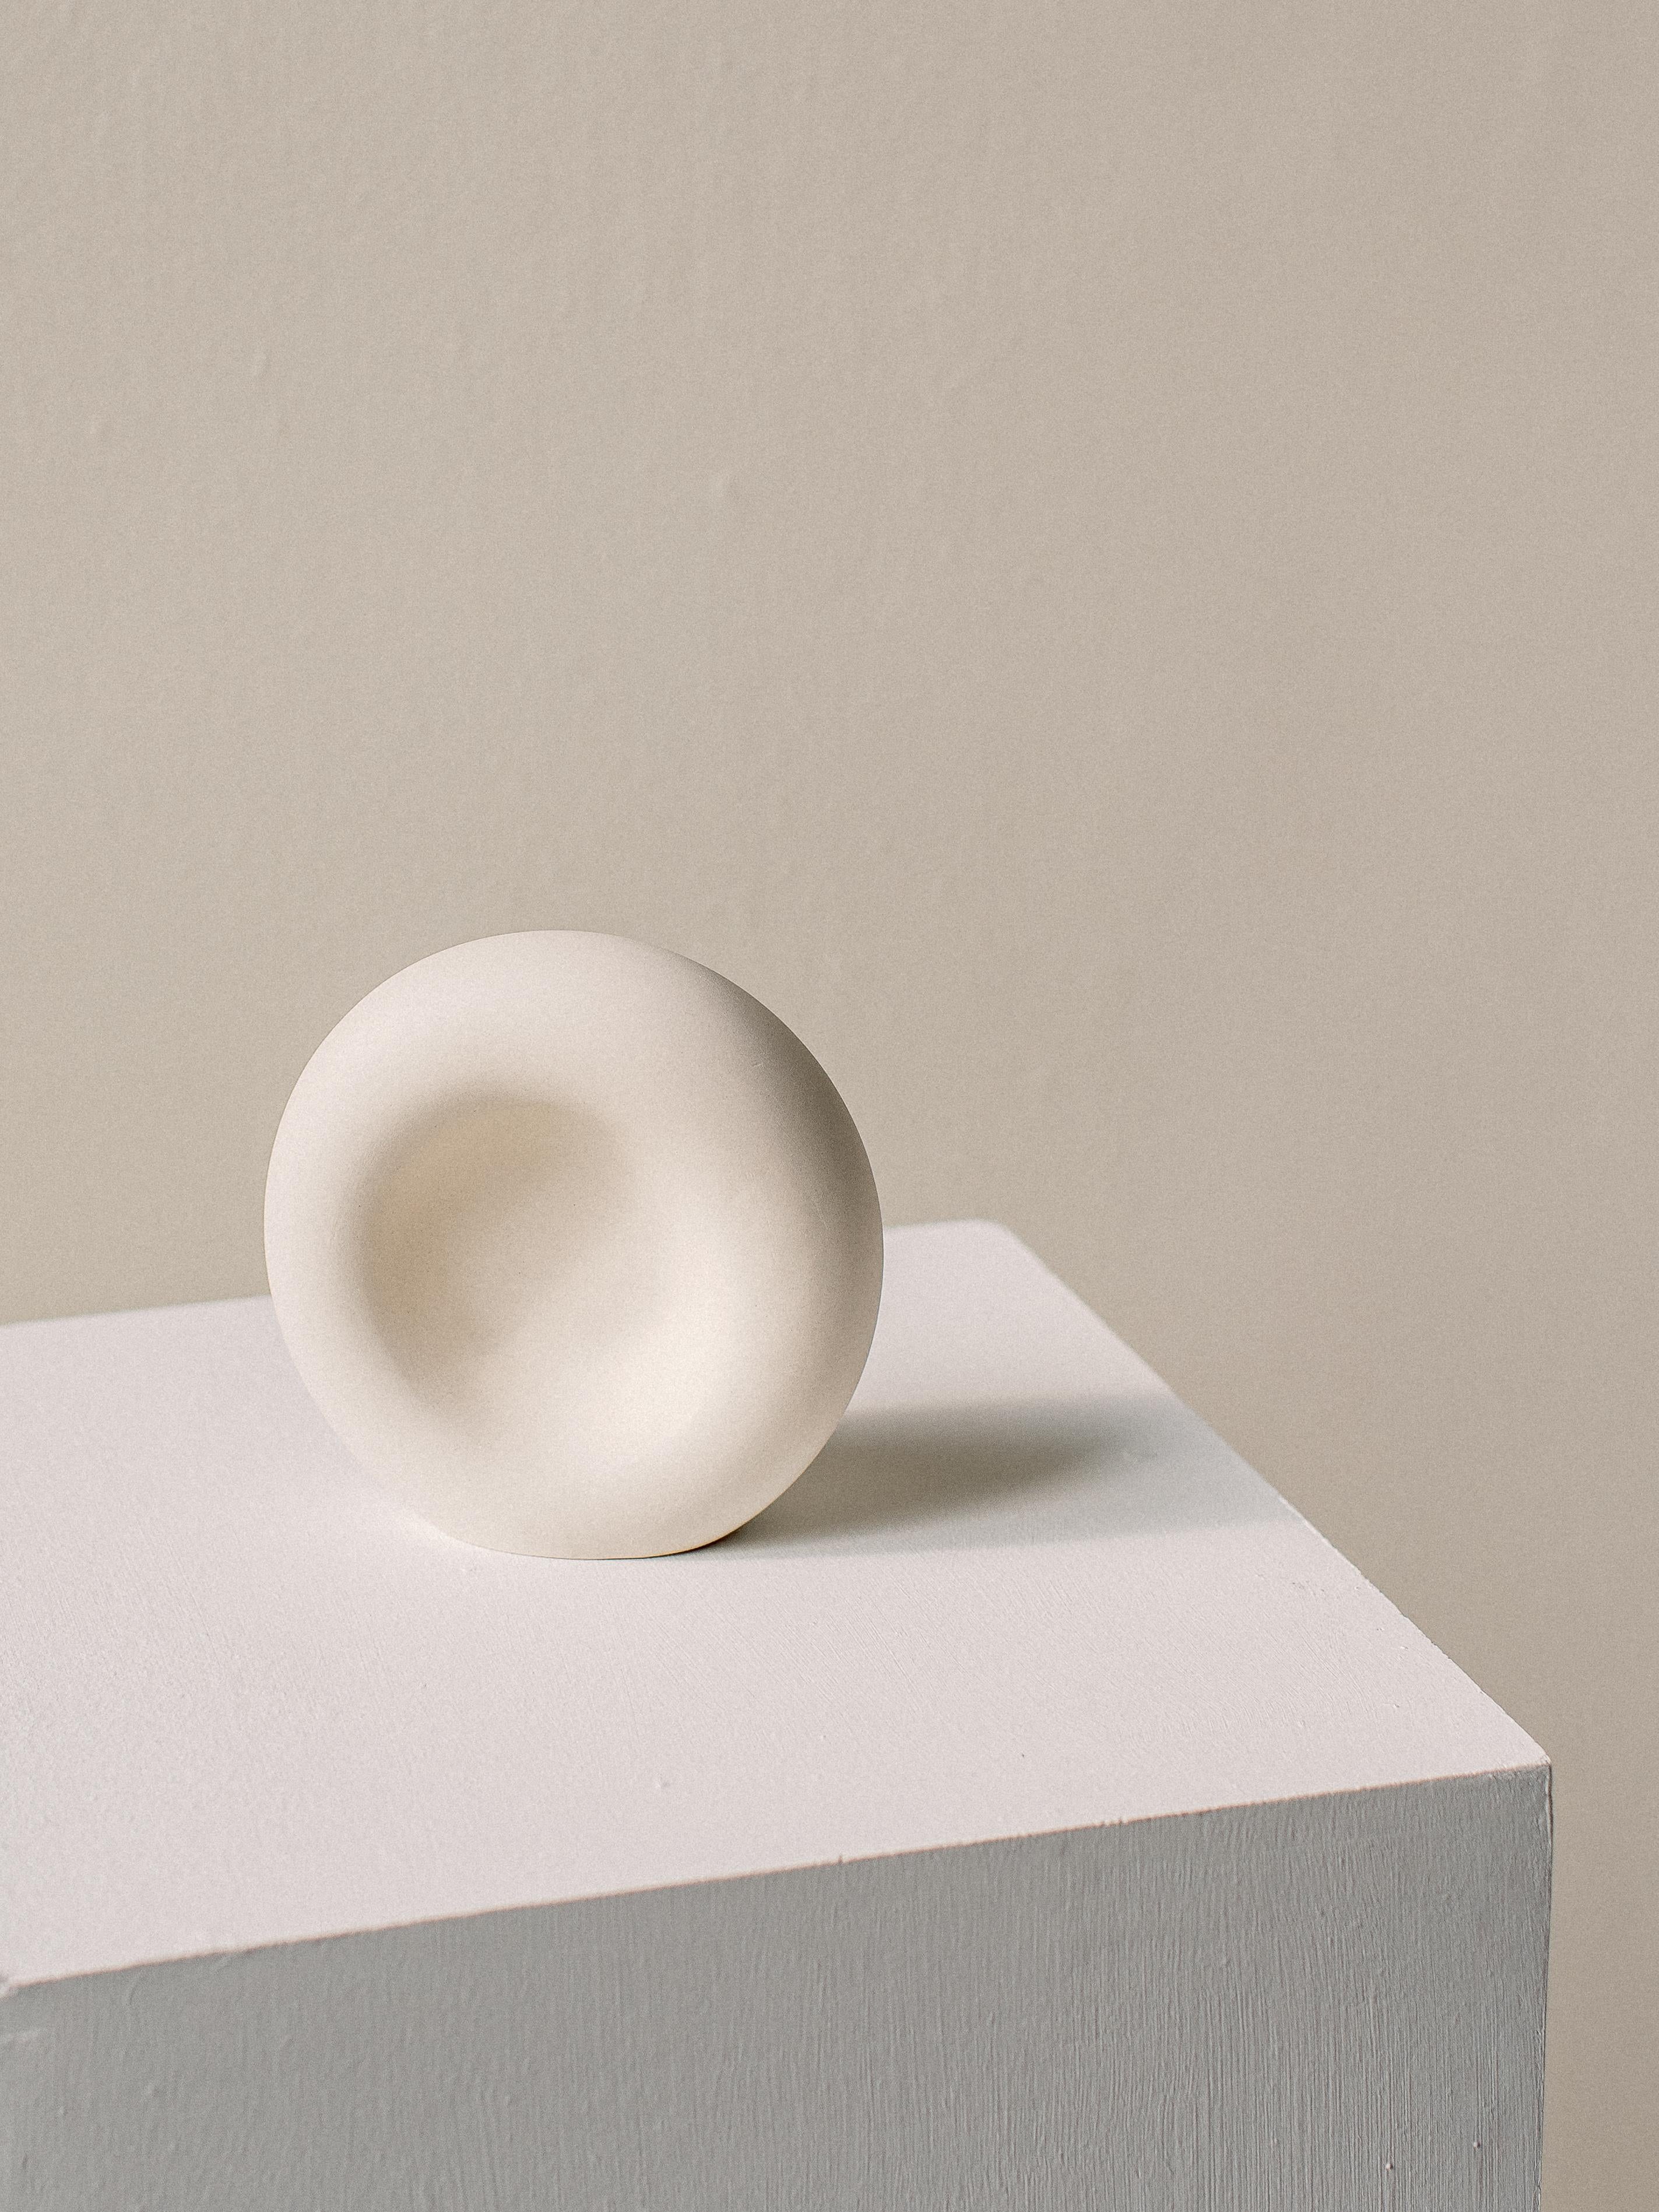 Unique listening form by Dust and Form
Dimensions: D 16.5 x 15 H cm
Materials: Porcelain

Origin Form Collection in three finishes: Hand-sanded (our classic, smooth, bare finish) Ivory (satin white glaze) Charcoal (matte black glaze). Please contact